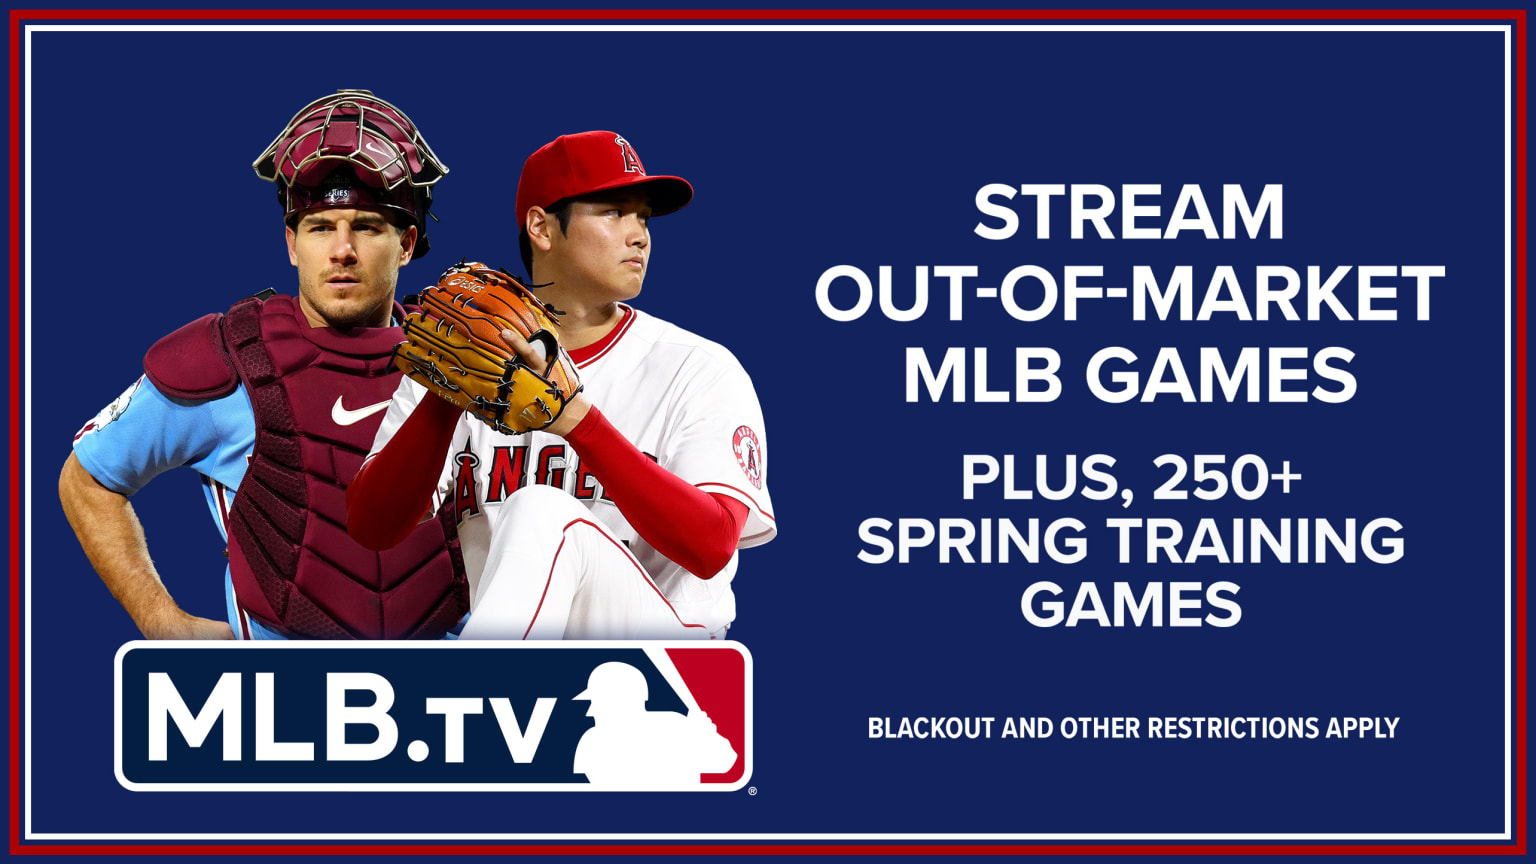 J.T. Realmuto and Shohei Ohtani are pictured next to a list of MLB.TV features